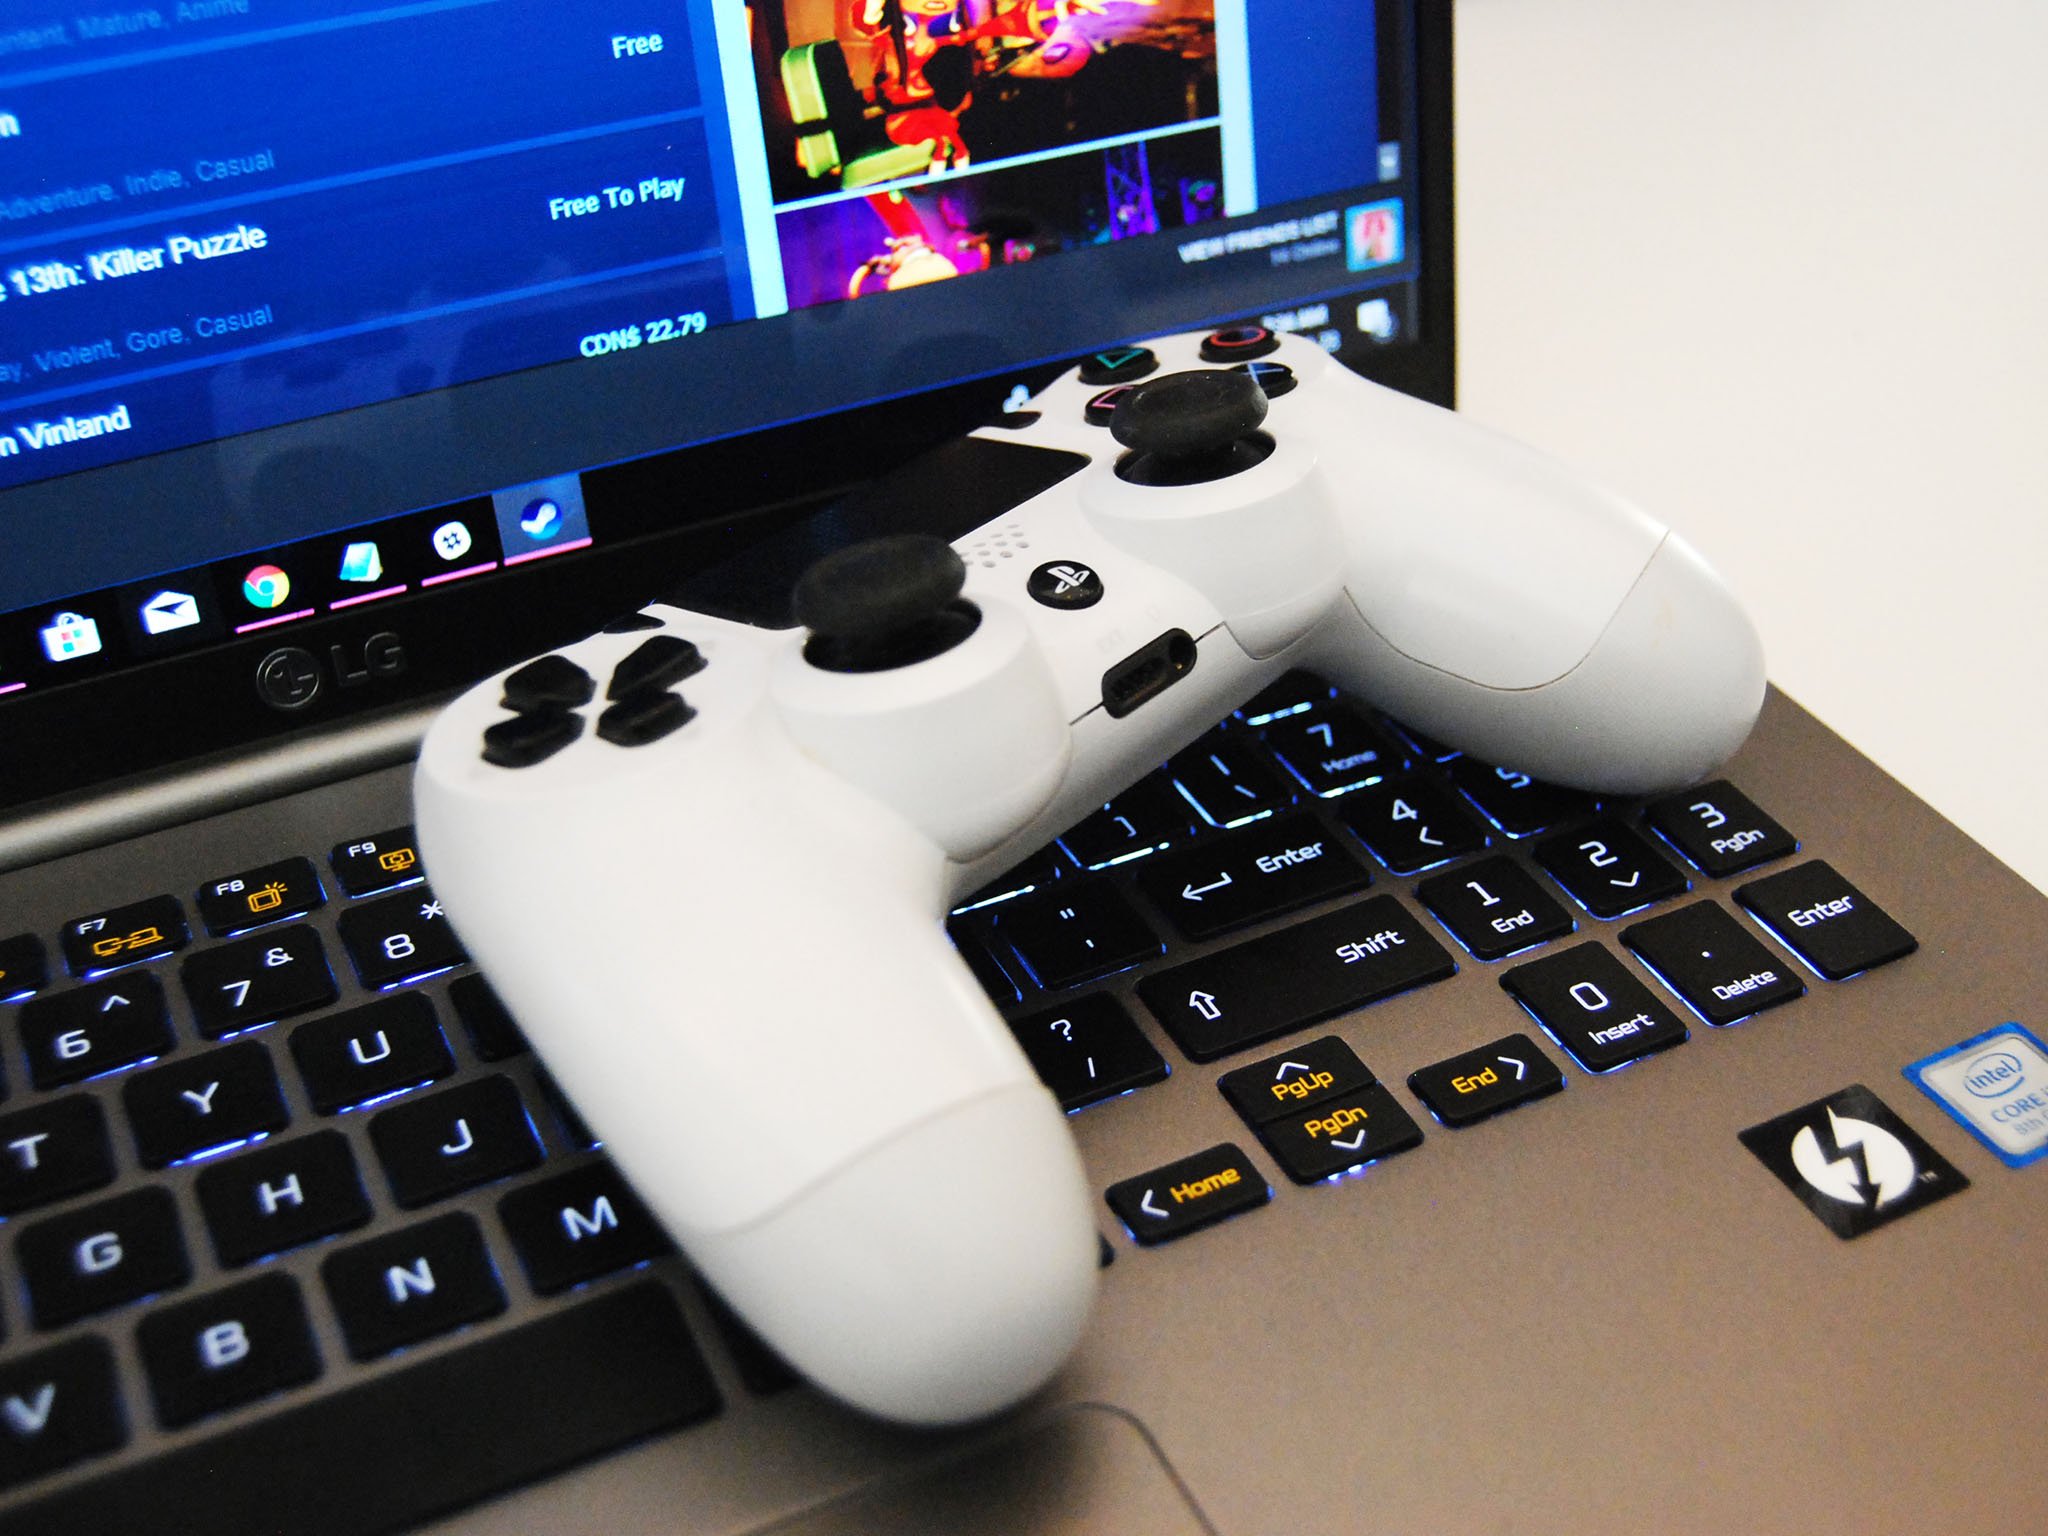 How do you connect a ps4 controller to your pc How To Connect A Playstation 4 Controller To Your Pc Windows Central